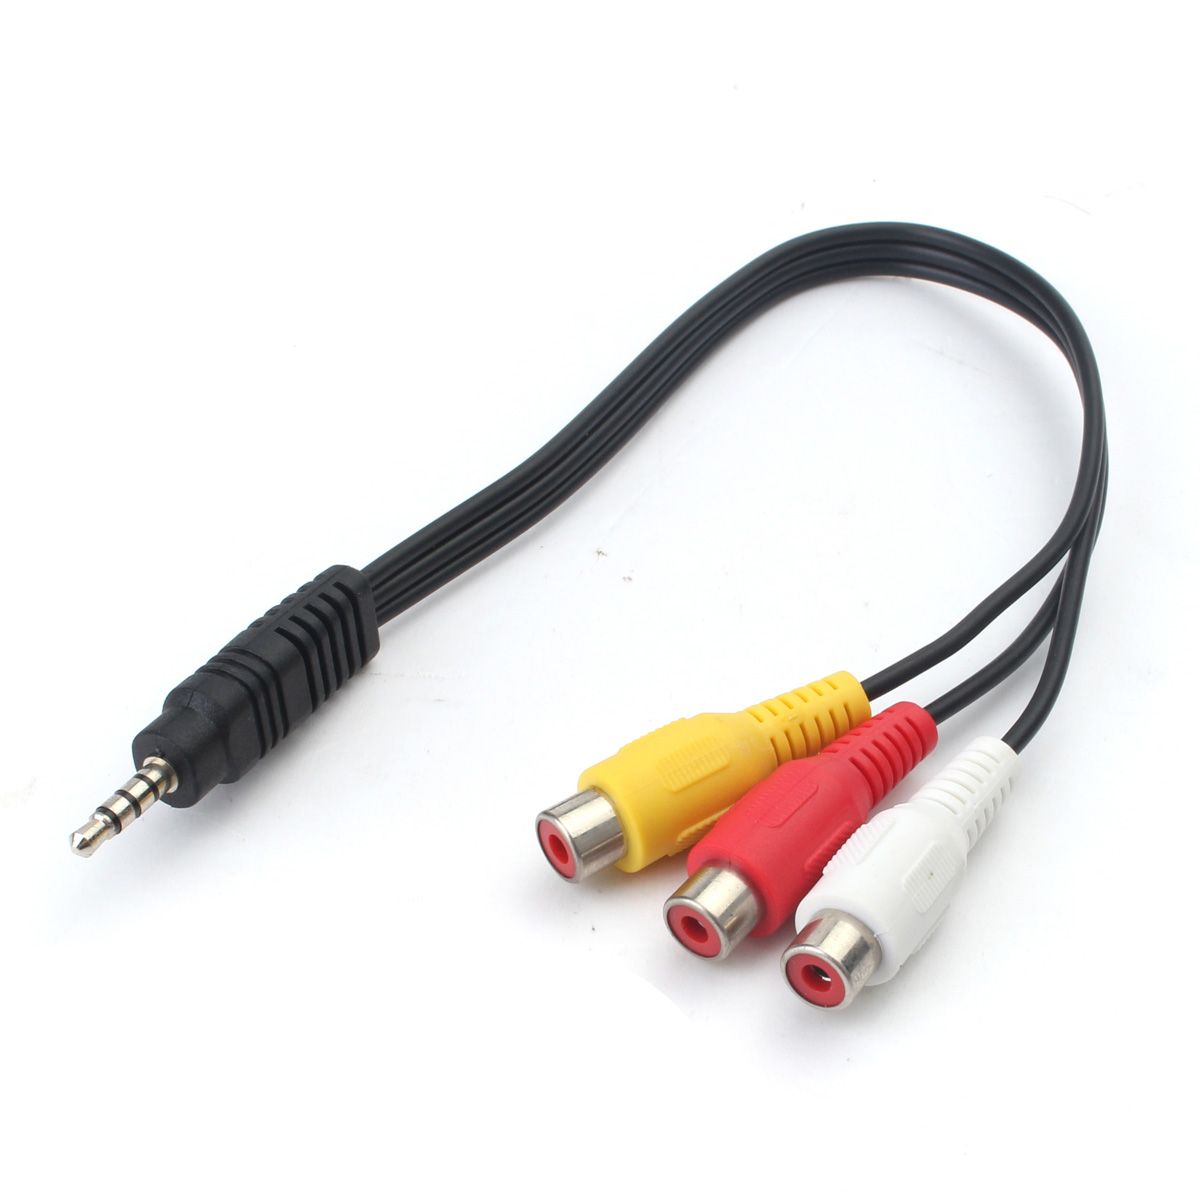 35mm-Mini-AV-Male-To-3-RCA-Female-Audio-Video-Cable-Stereo-Jack-Adapter-Cord-1111434